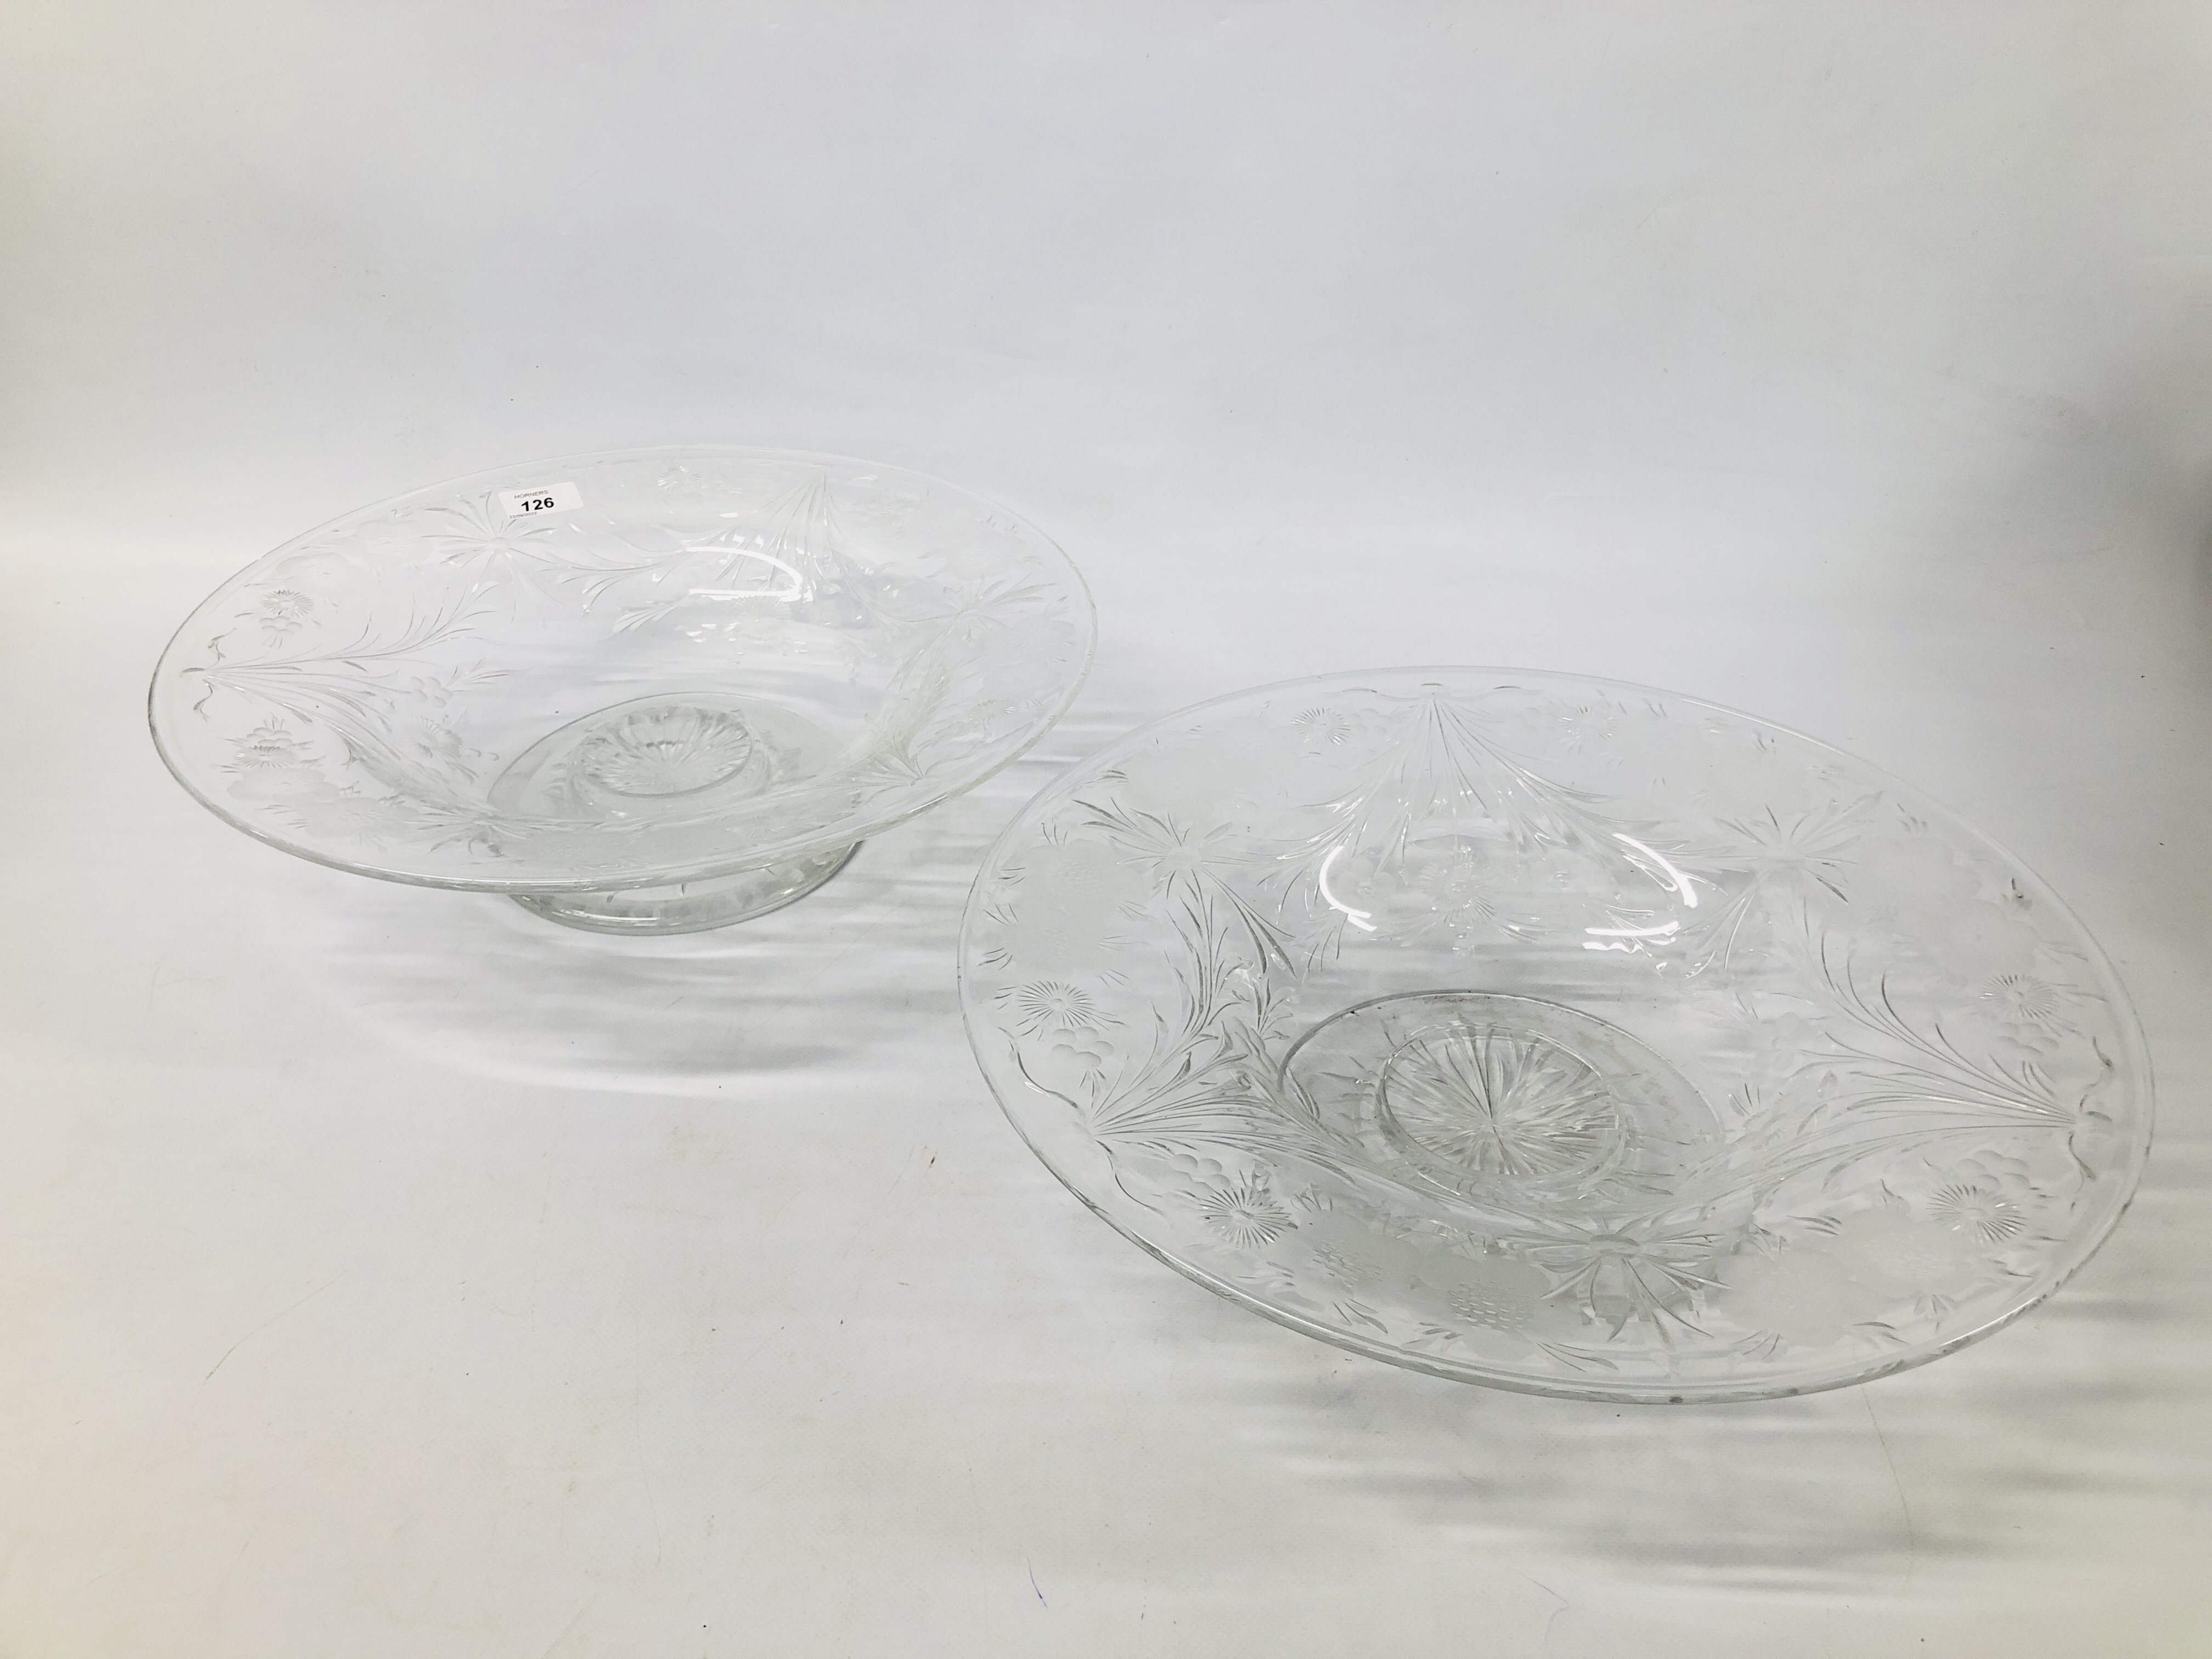 A PAIR OF IMPRESSIVE FOOTED GLASS CENTRE BOWLS WITH FLORAL DESIGNS.